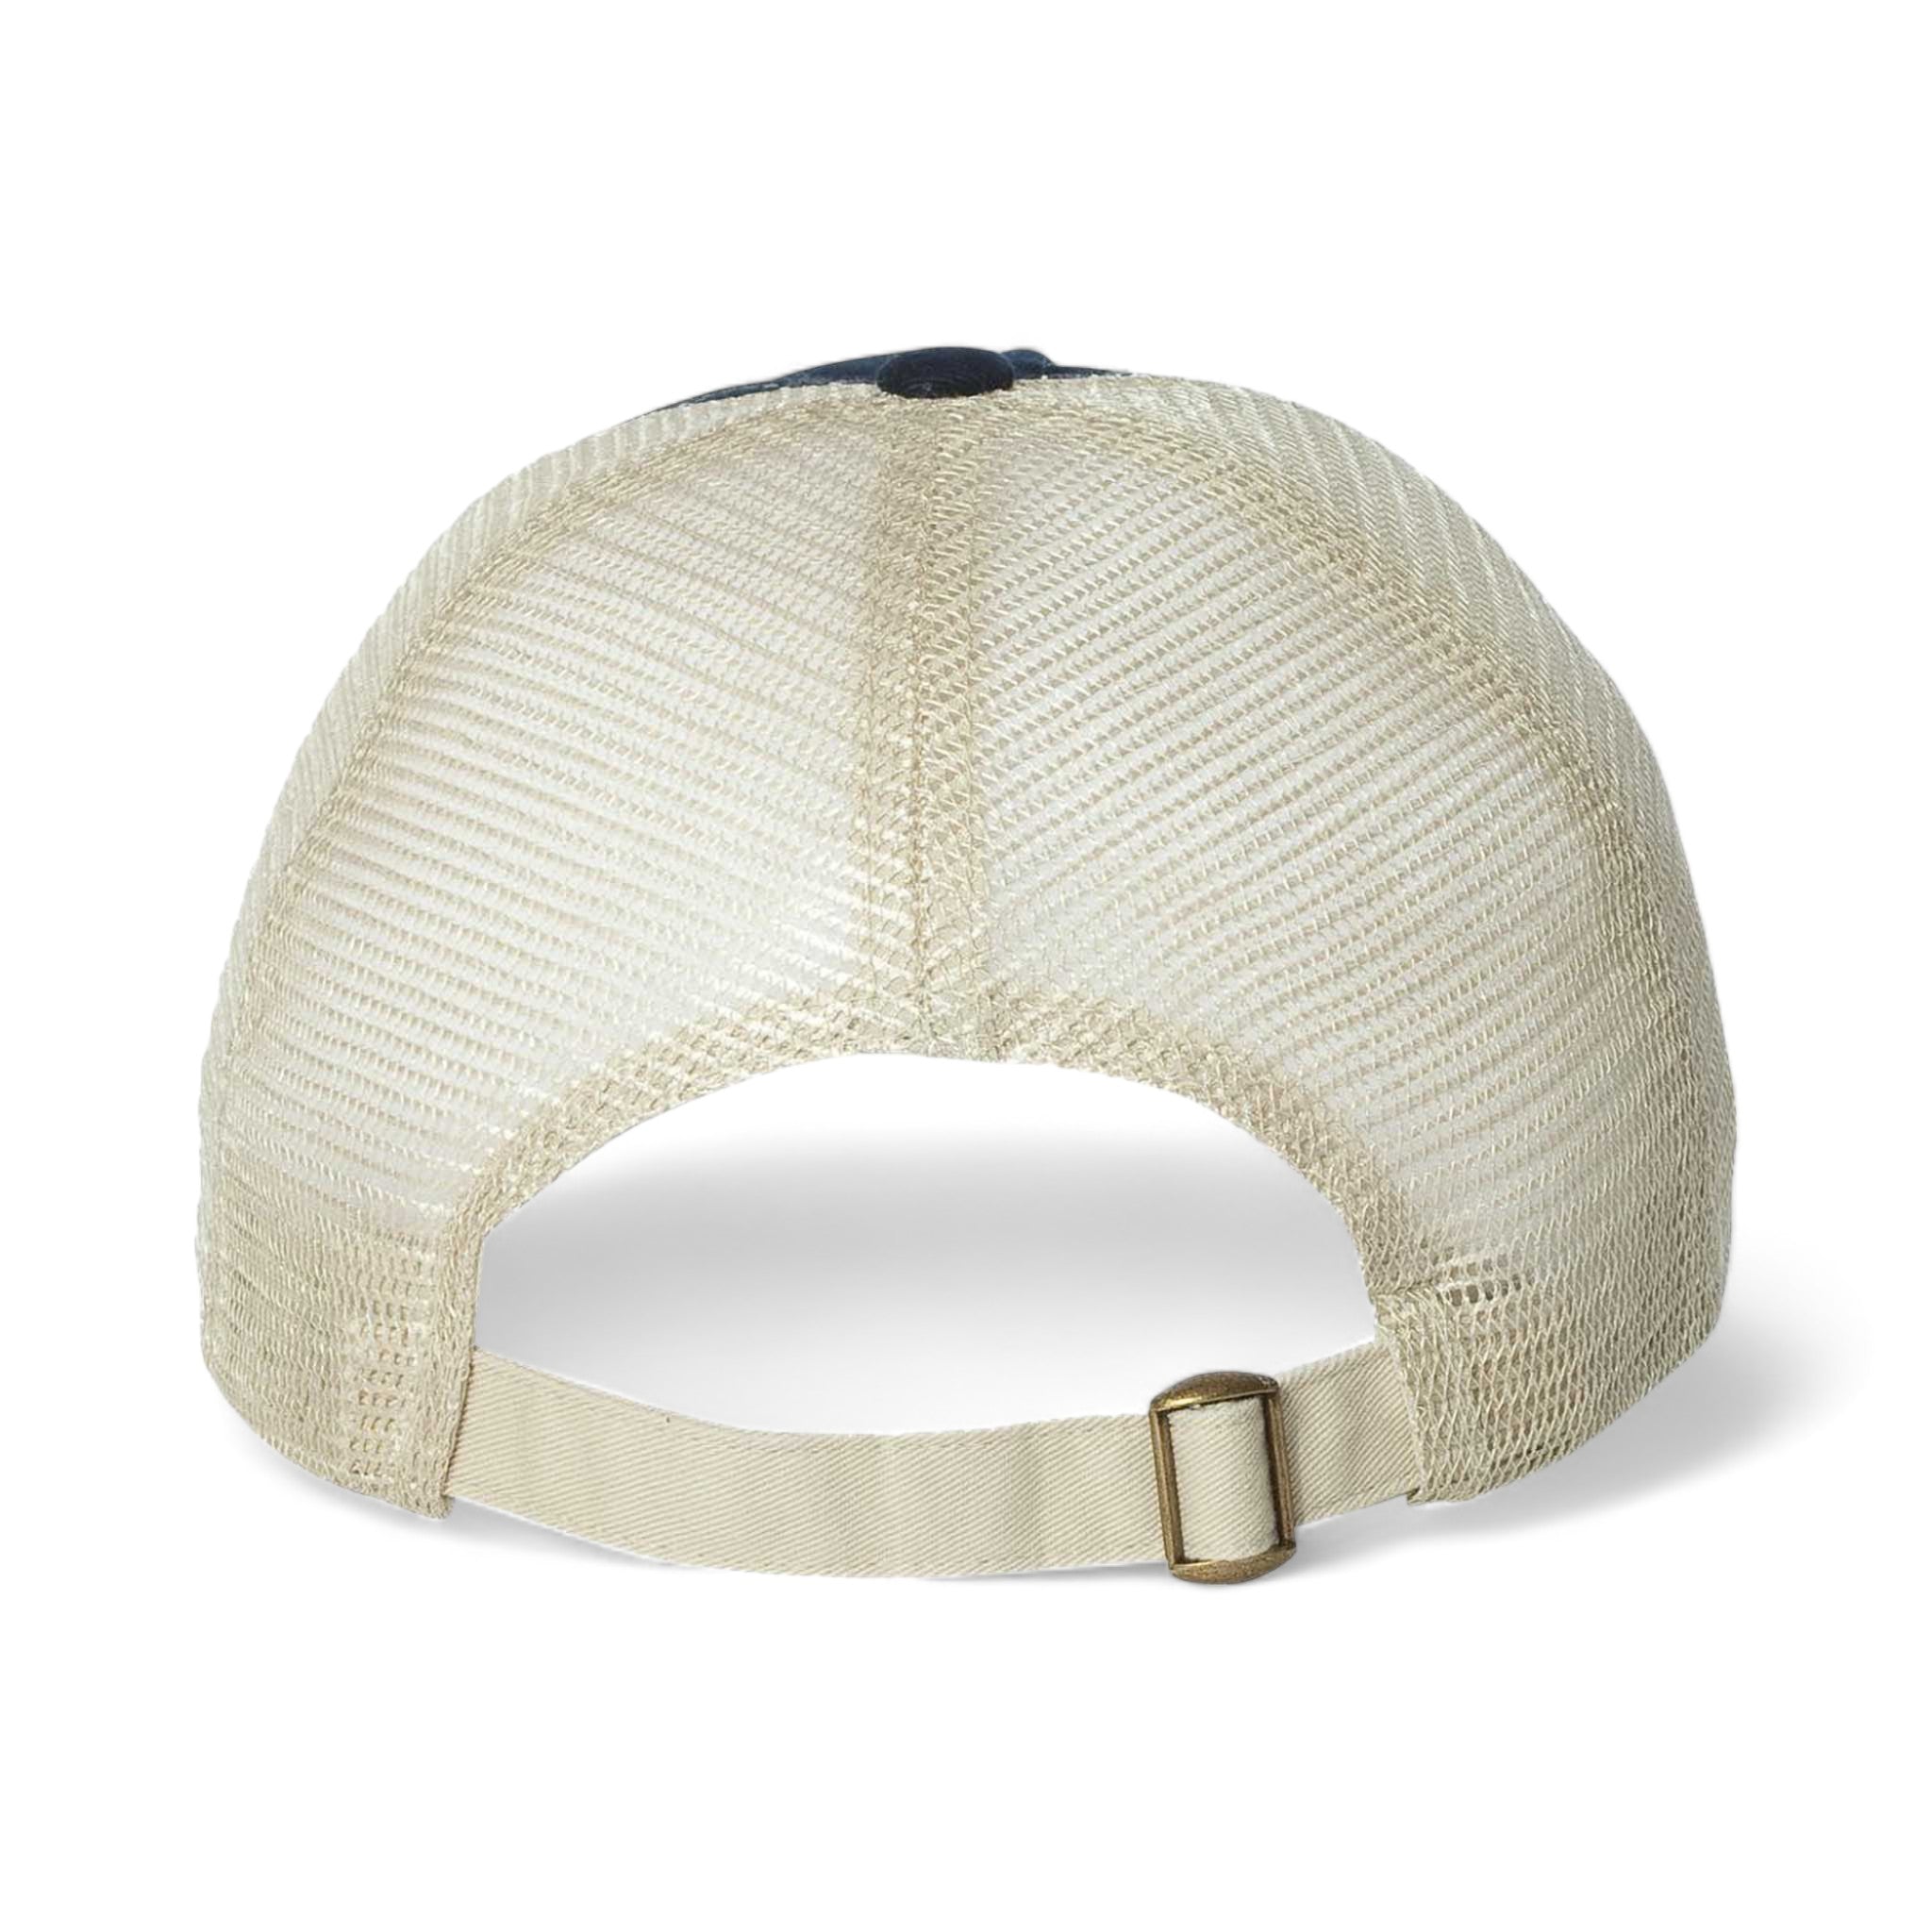 Back view of Sportsman 3100 custom hat in navy and stone